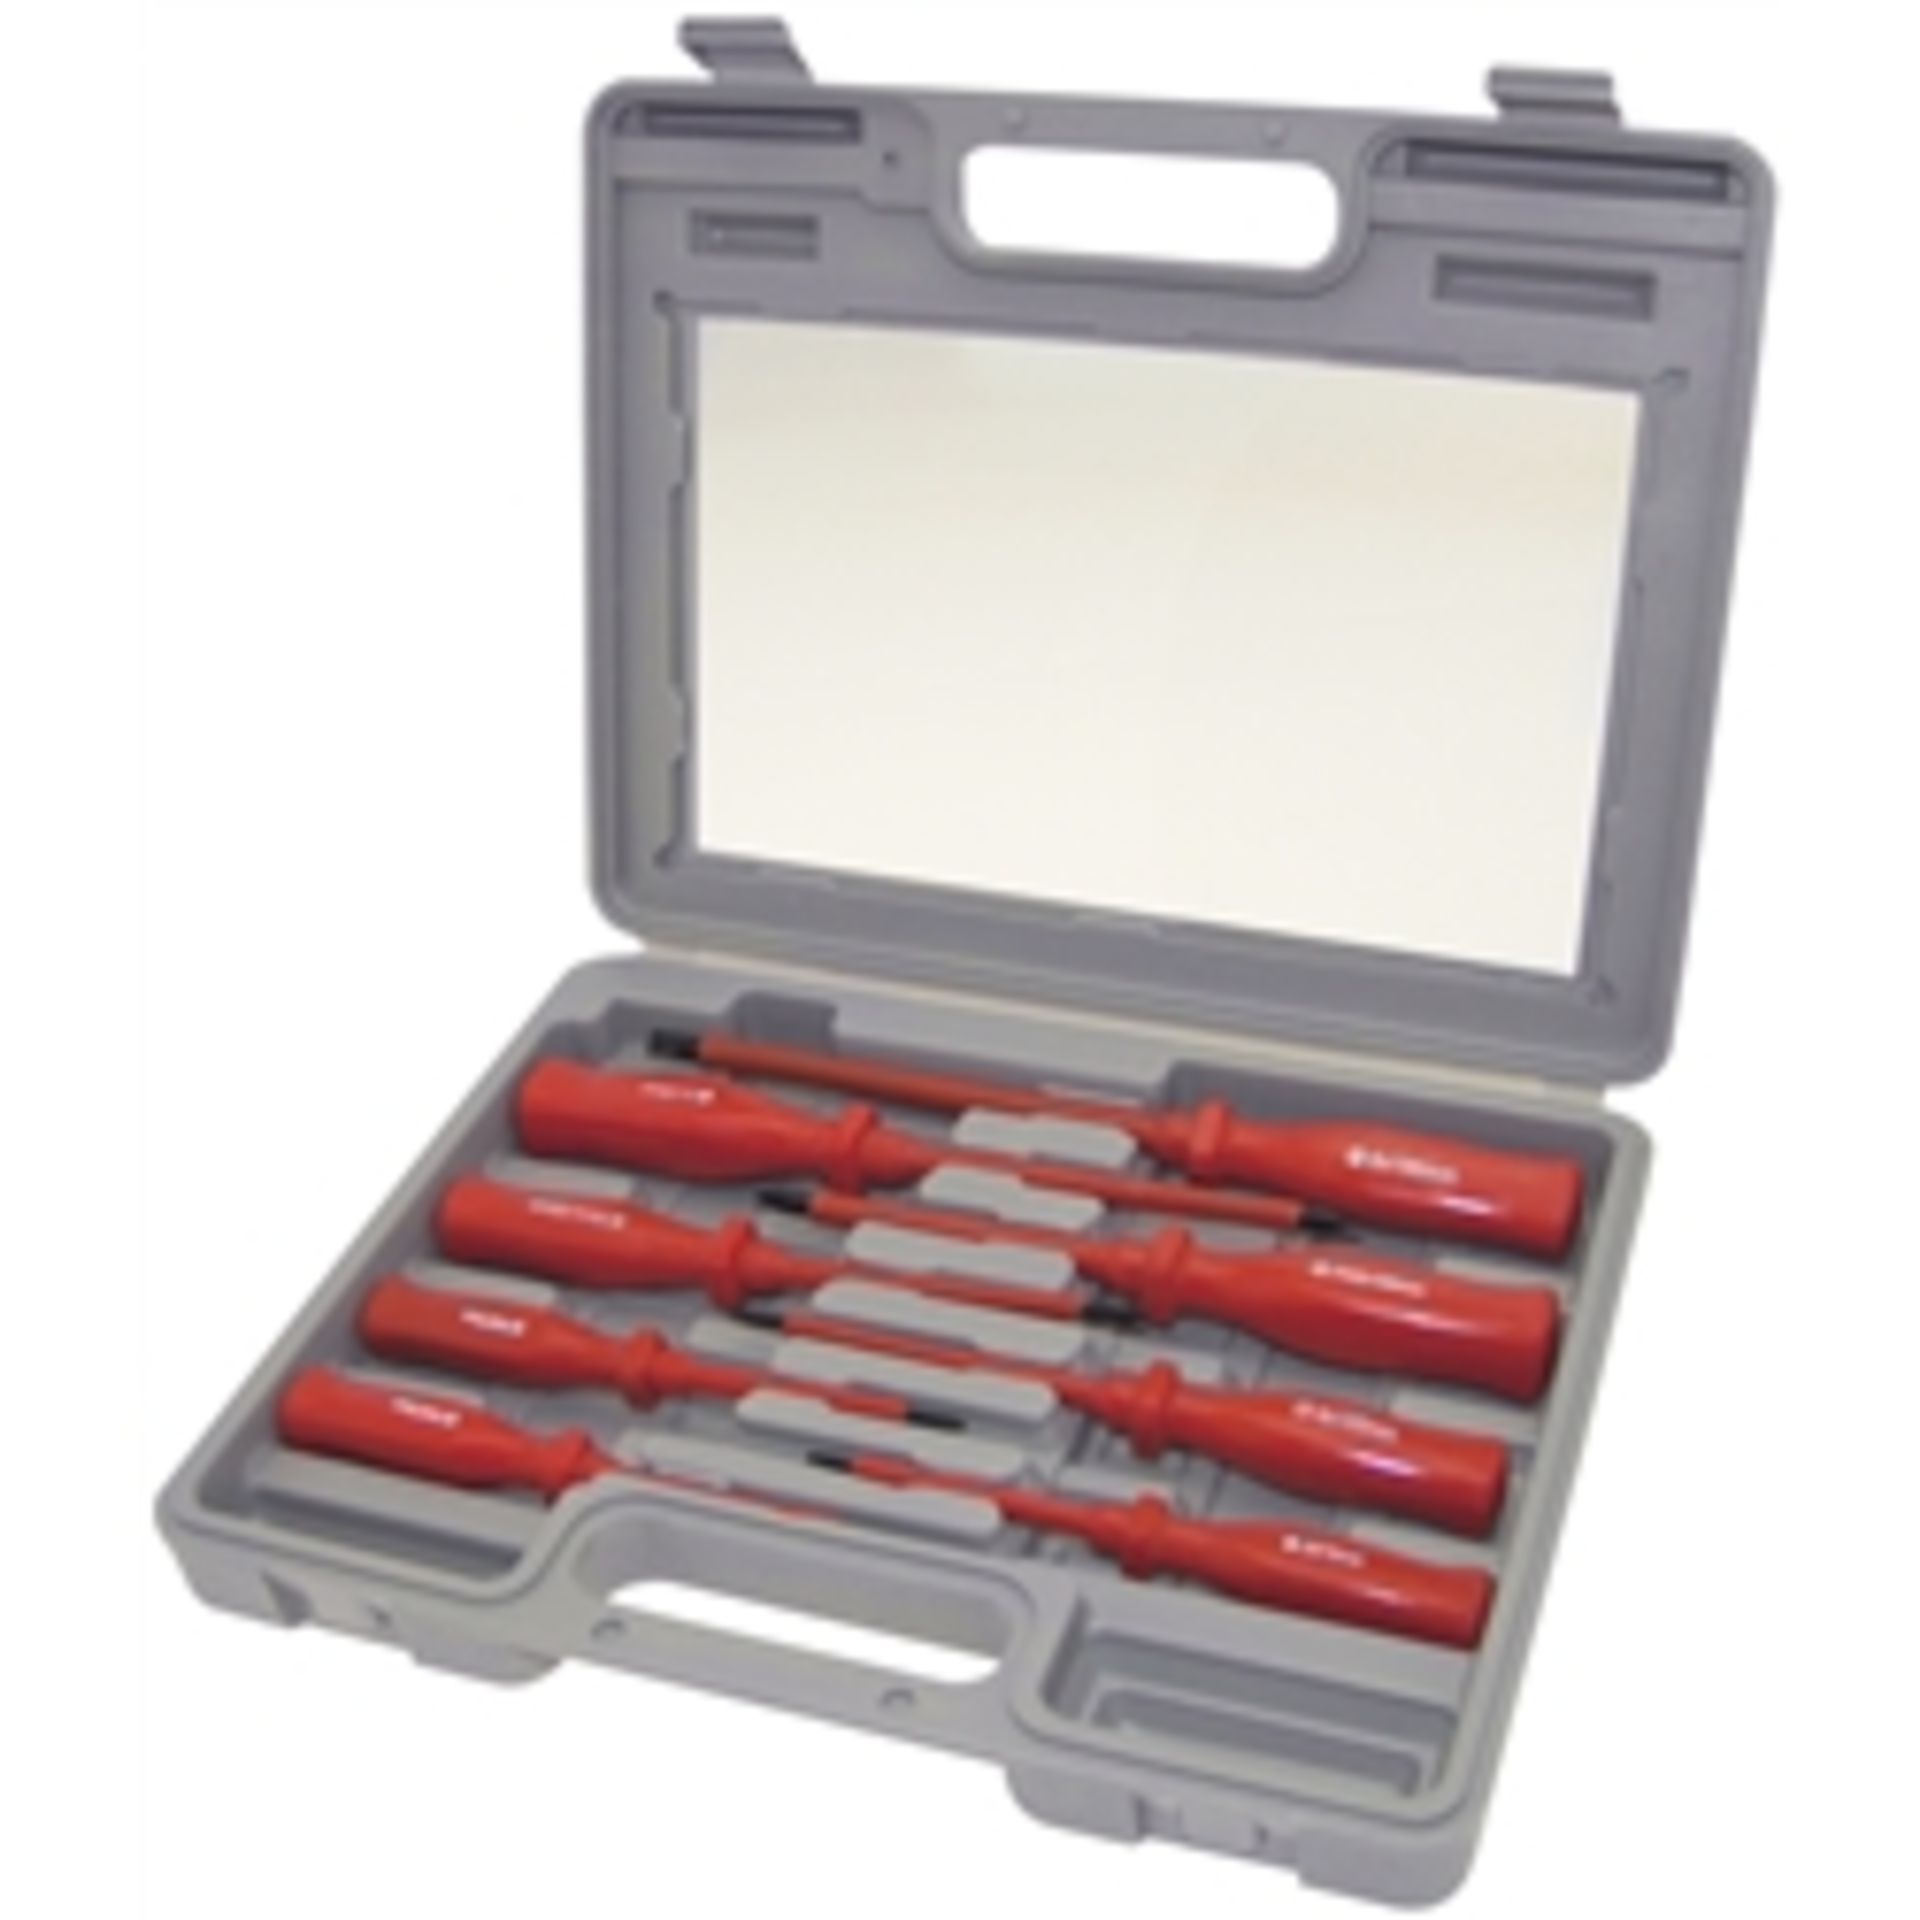 V *TRADE QTY* Brand New Eight Piece Screwdriver Set In Carry case X 7 YOUR BID PRICE TO BE - Image 2 of 2